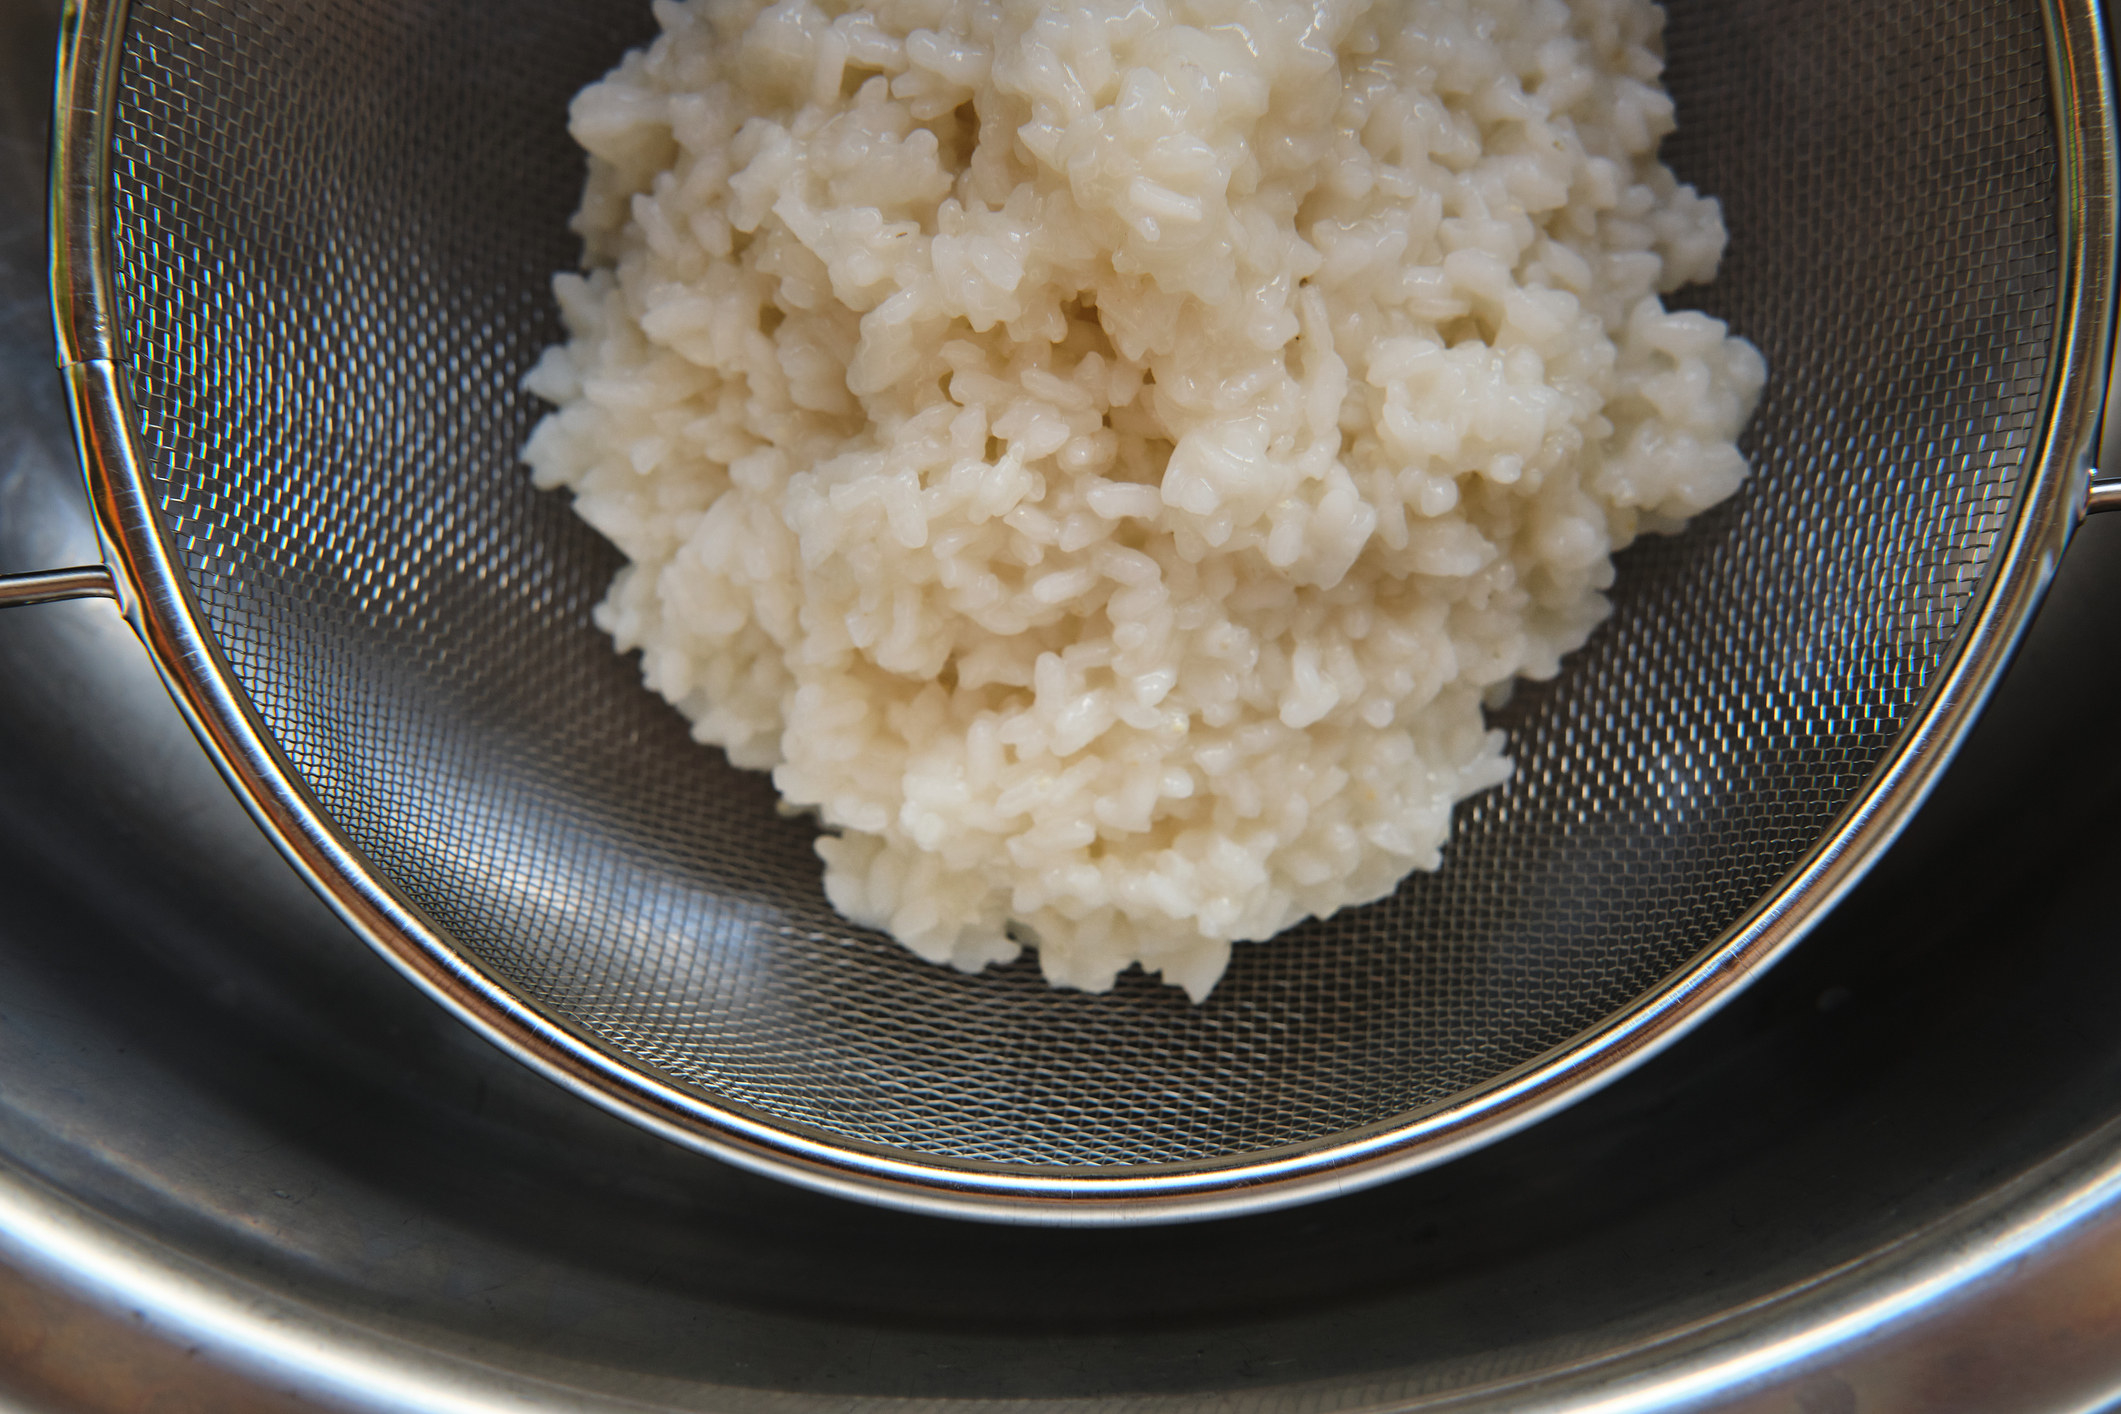 Coconut rice in a sieve